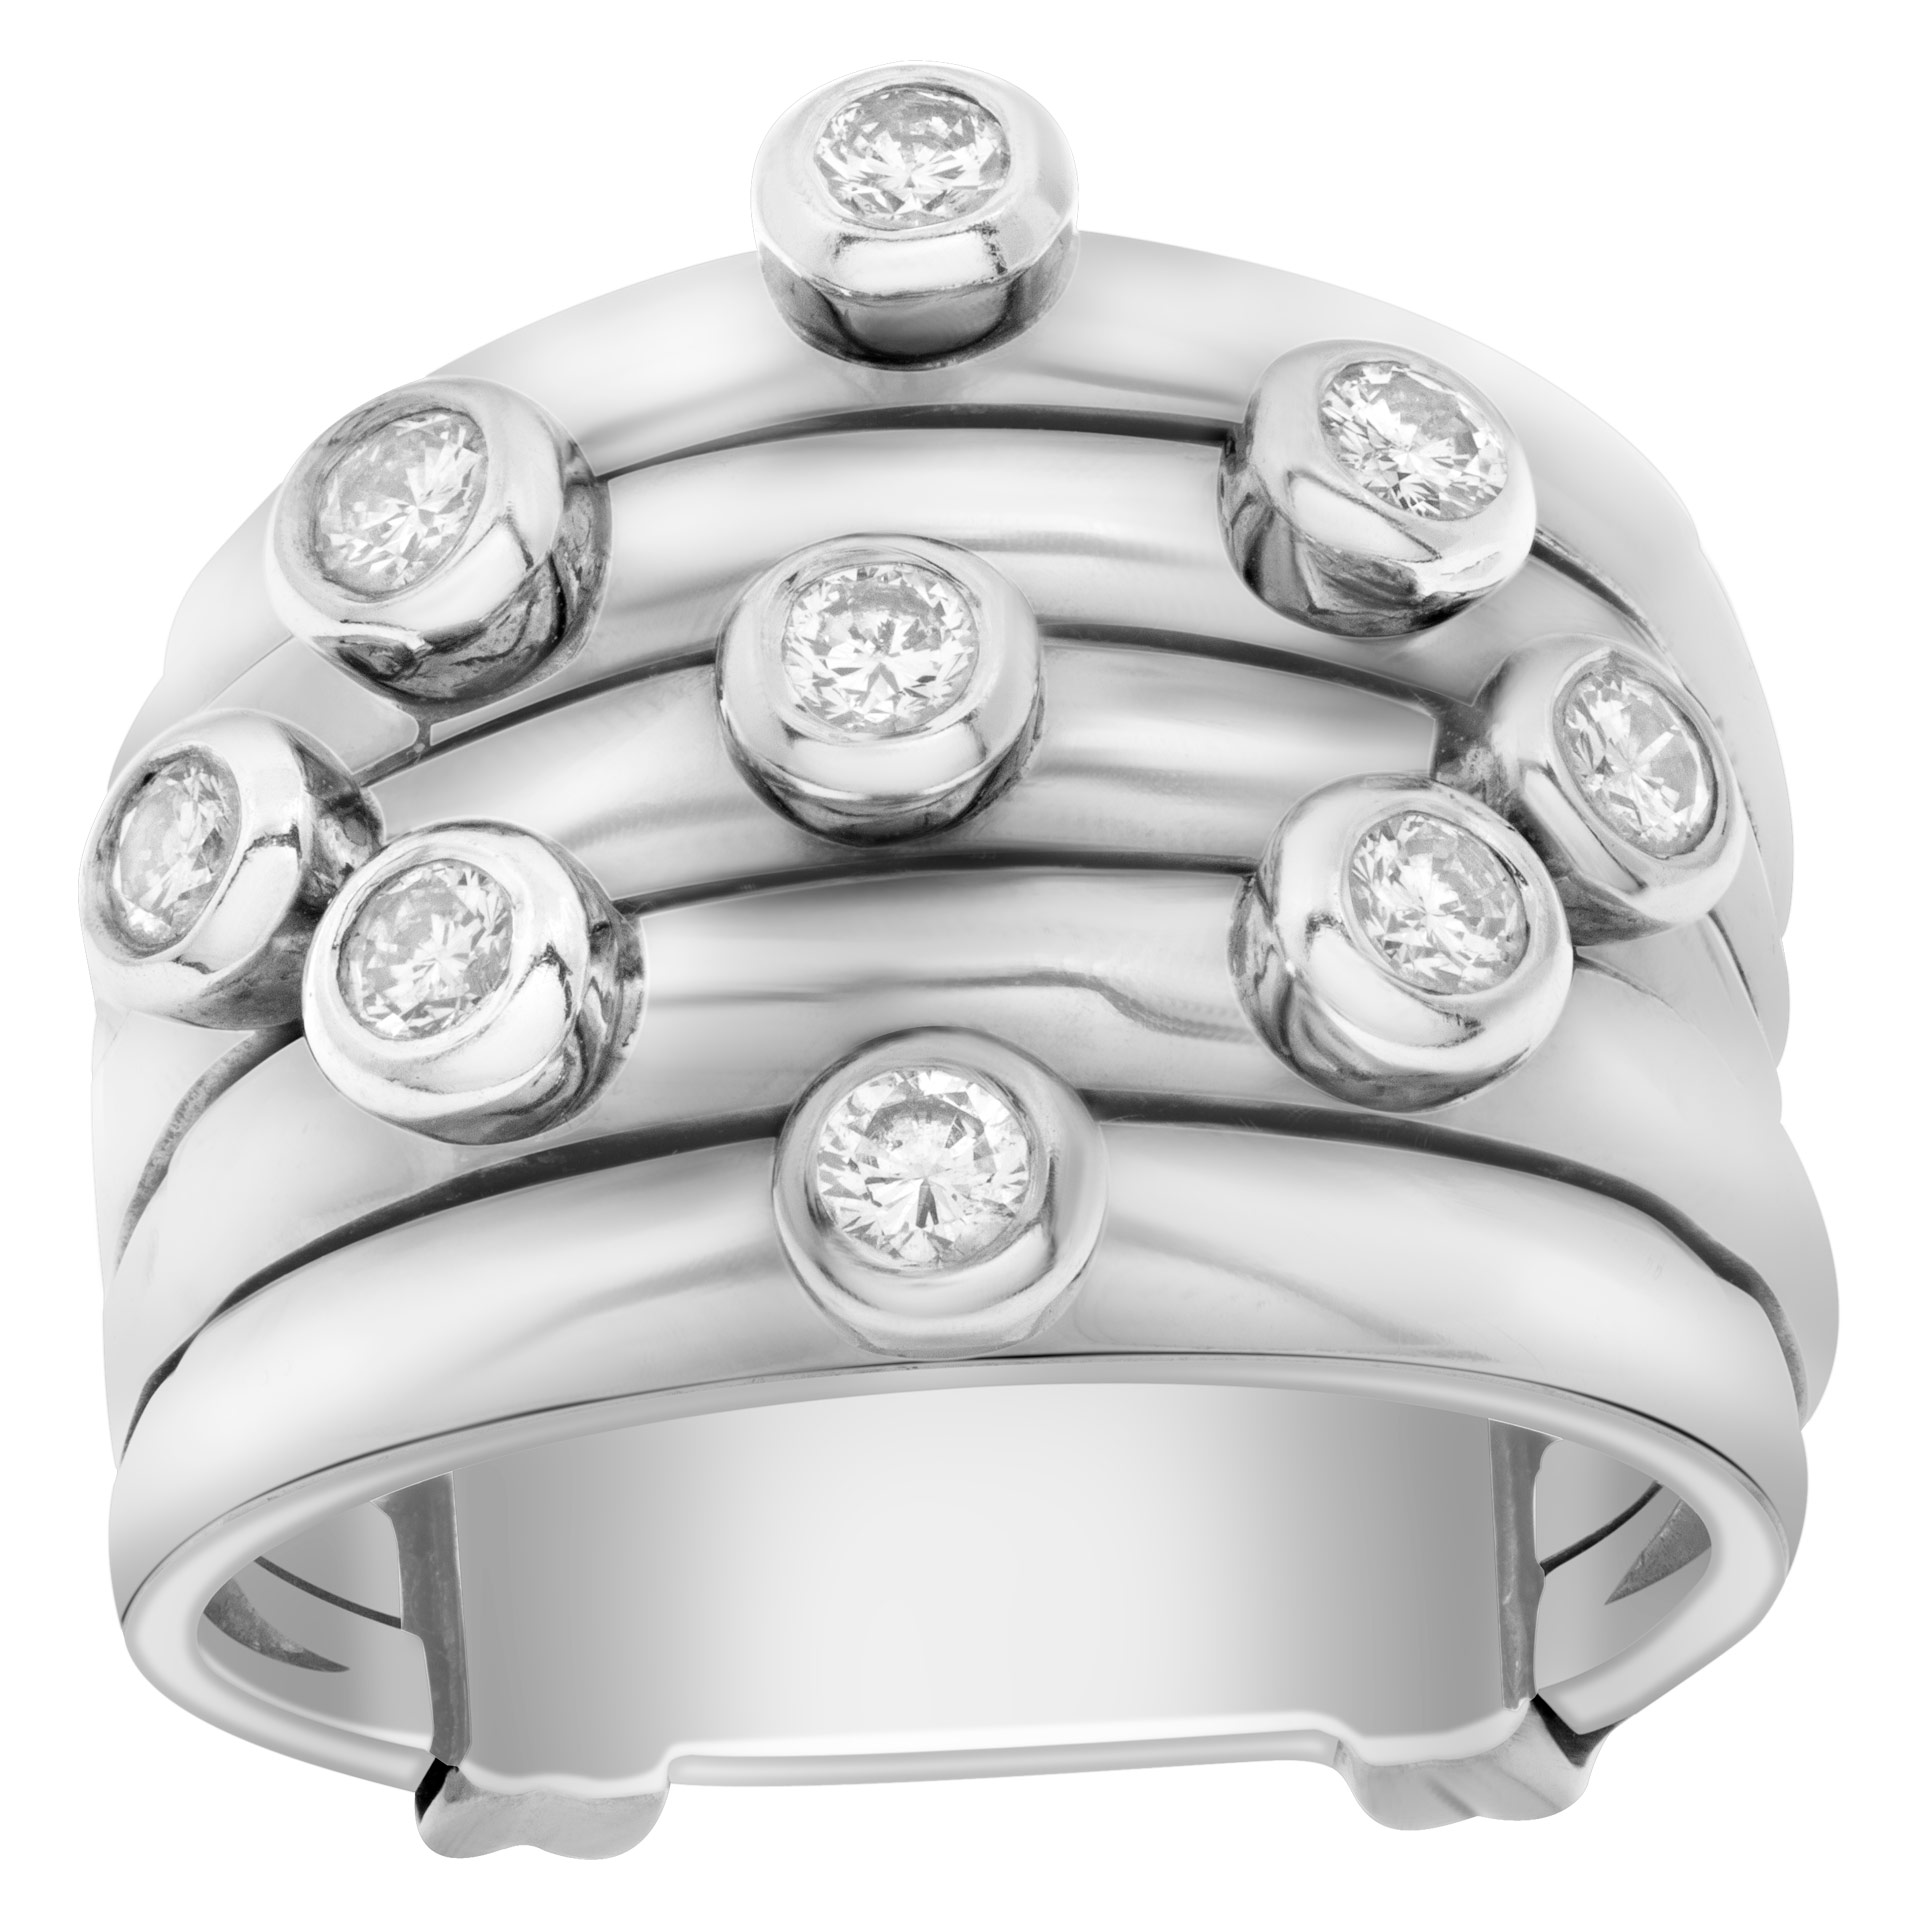 Wide diamonds ring set in 18k white gold. Round brilliant bezeled set diamonds total approx. weight: 1.00 carat